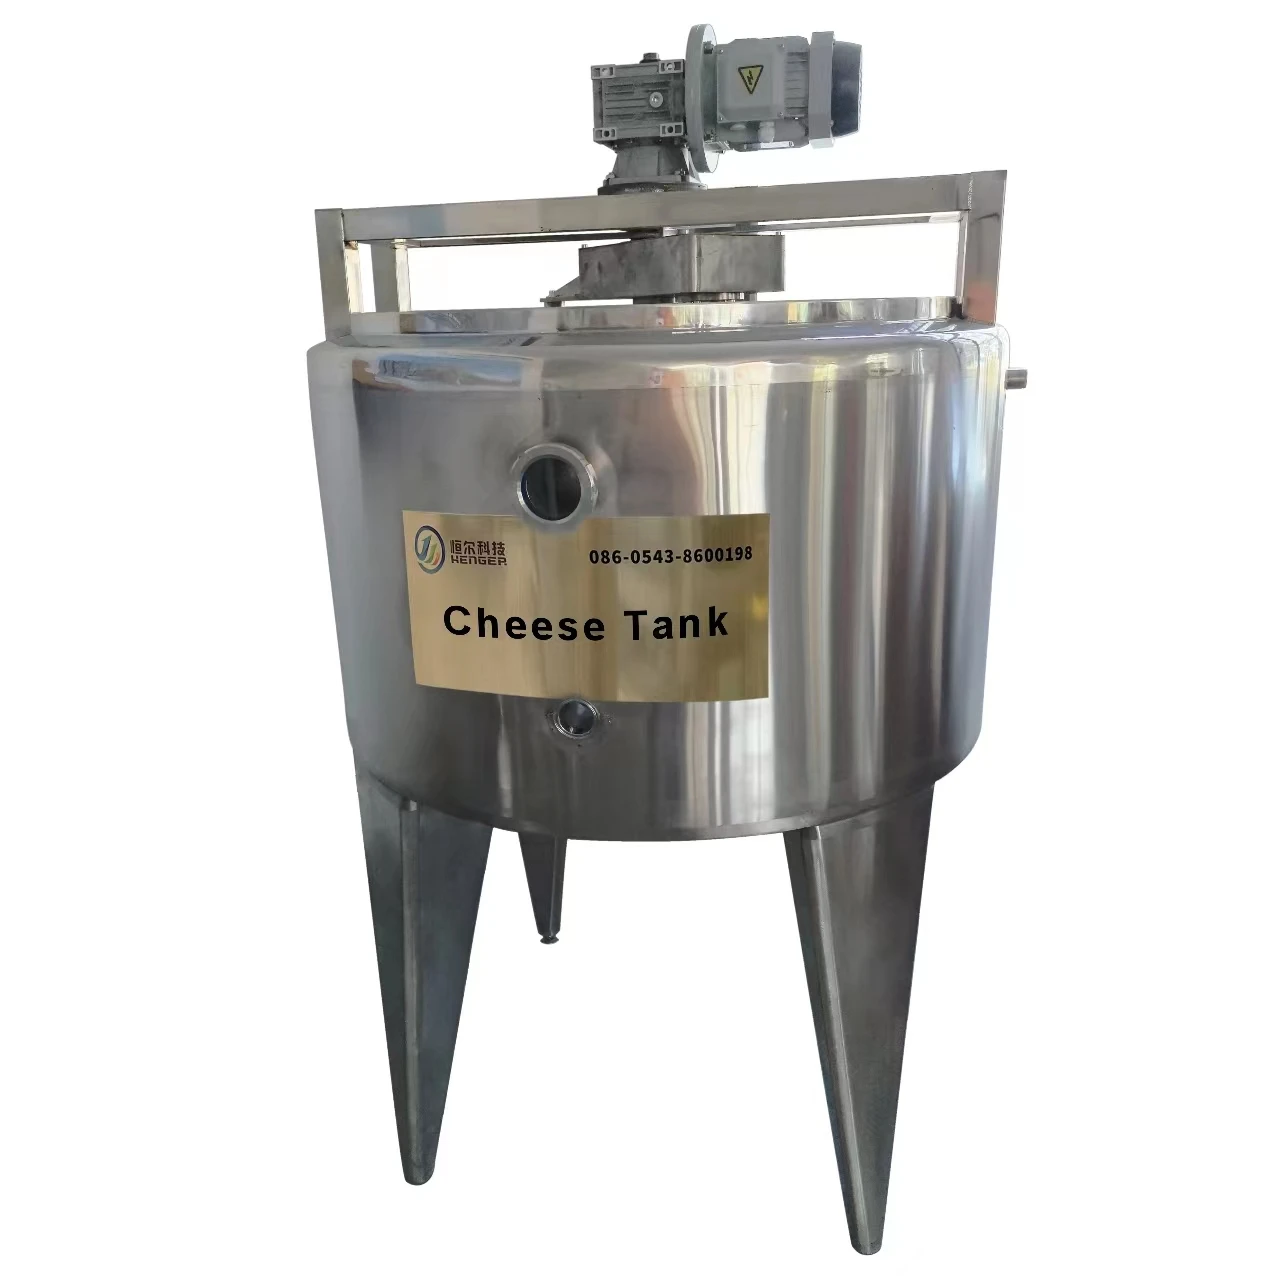 Cheese Vats for sale, Cheese-Making Equipment